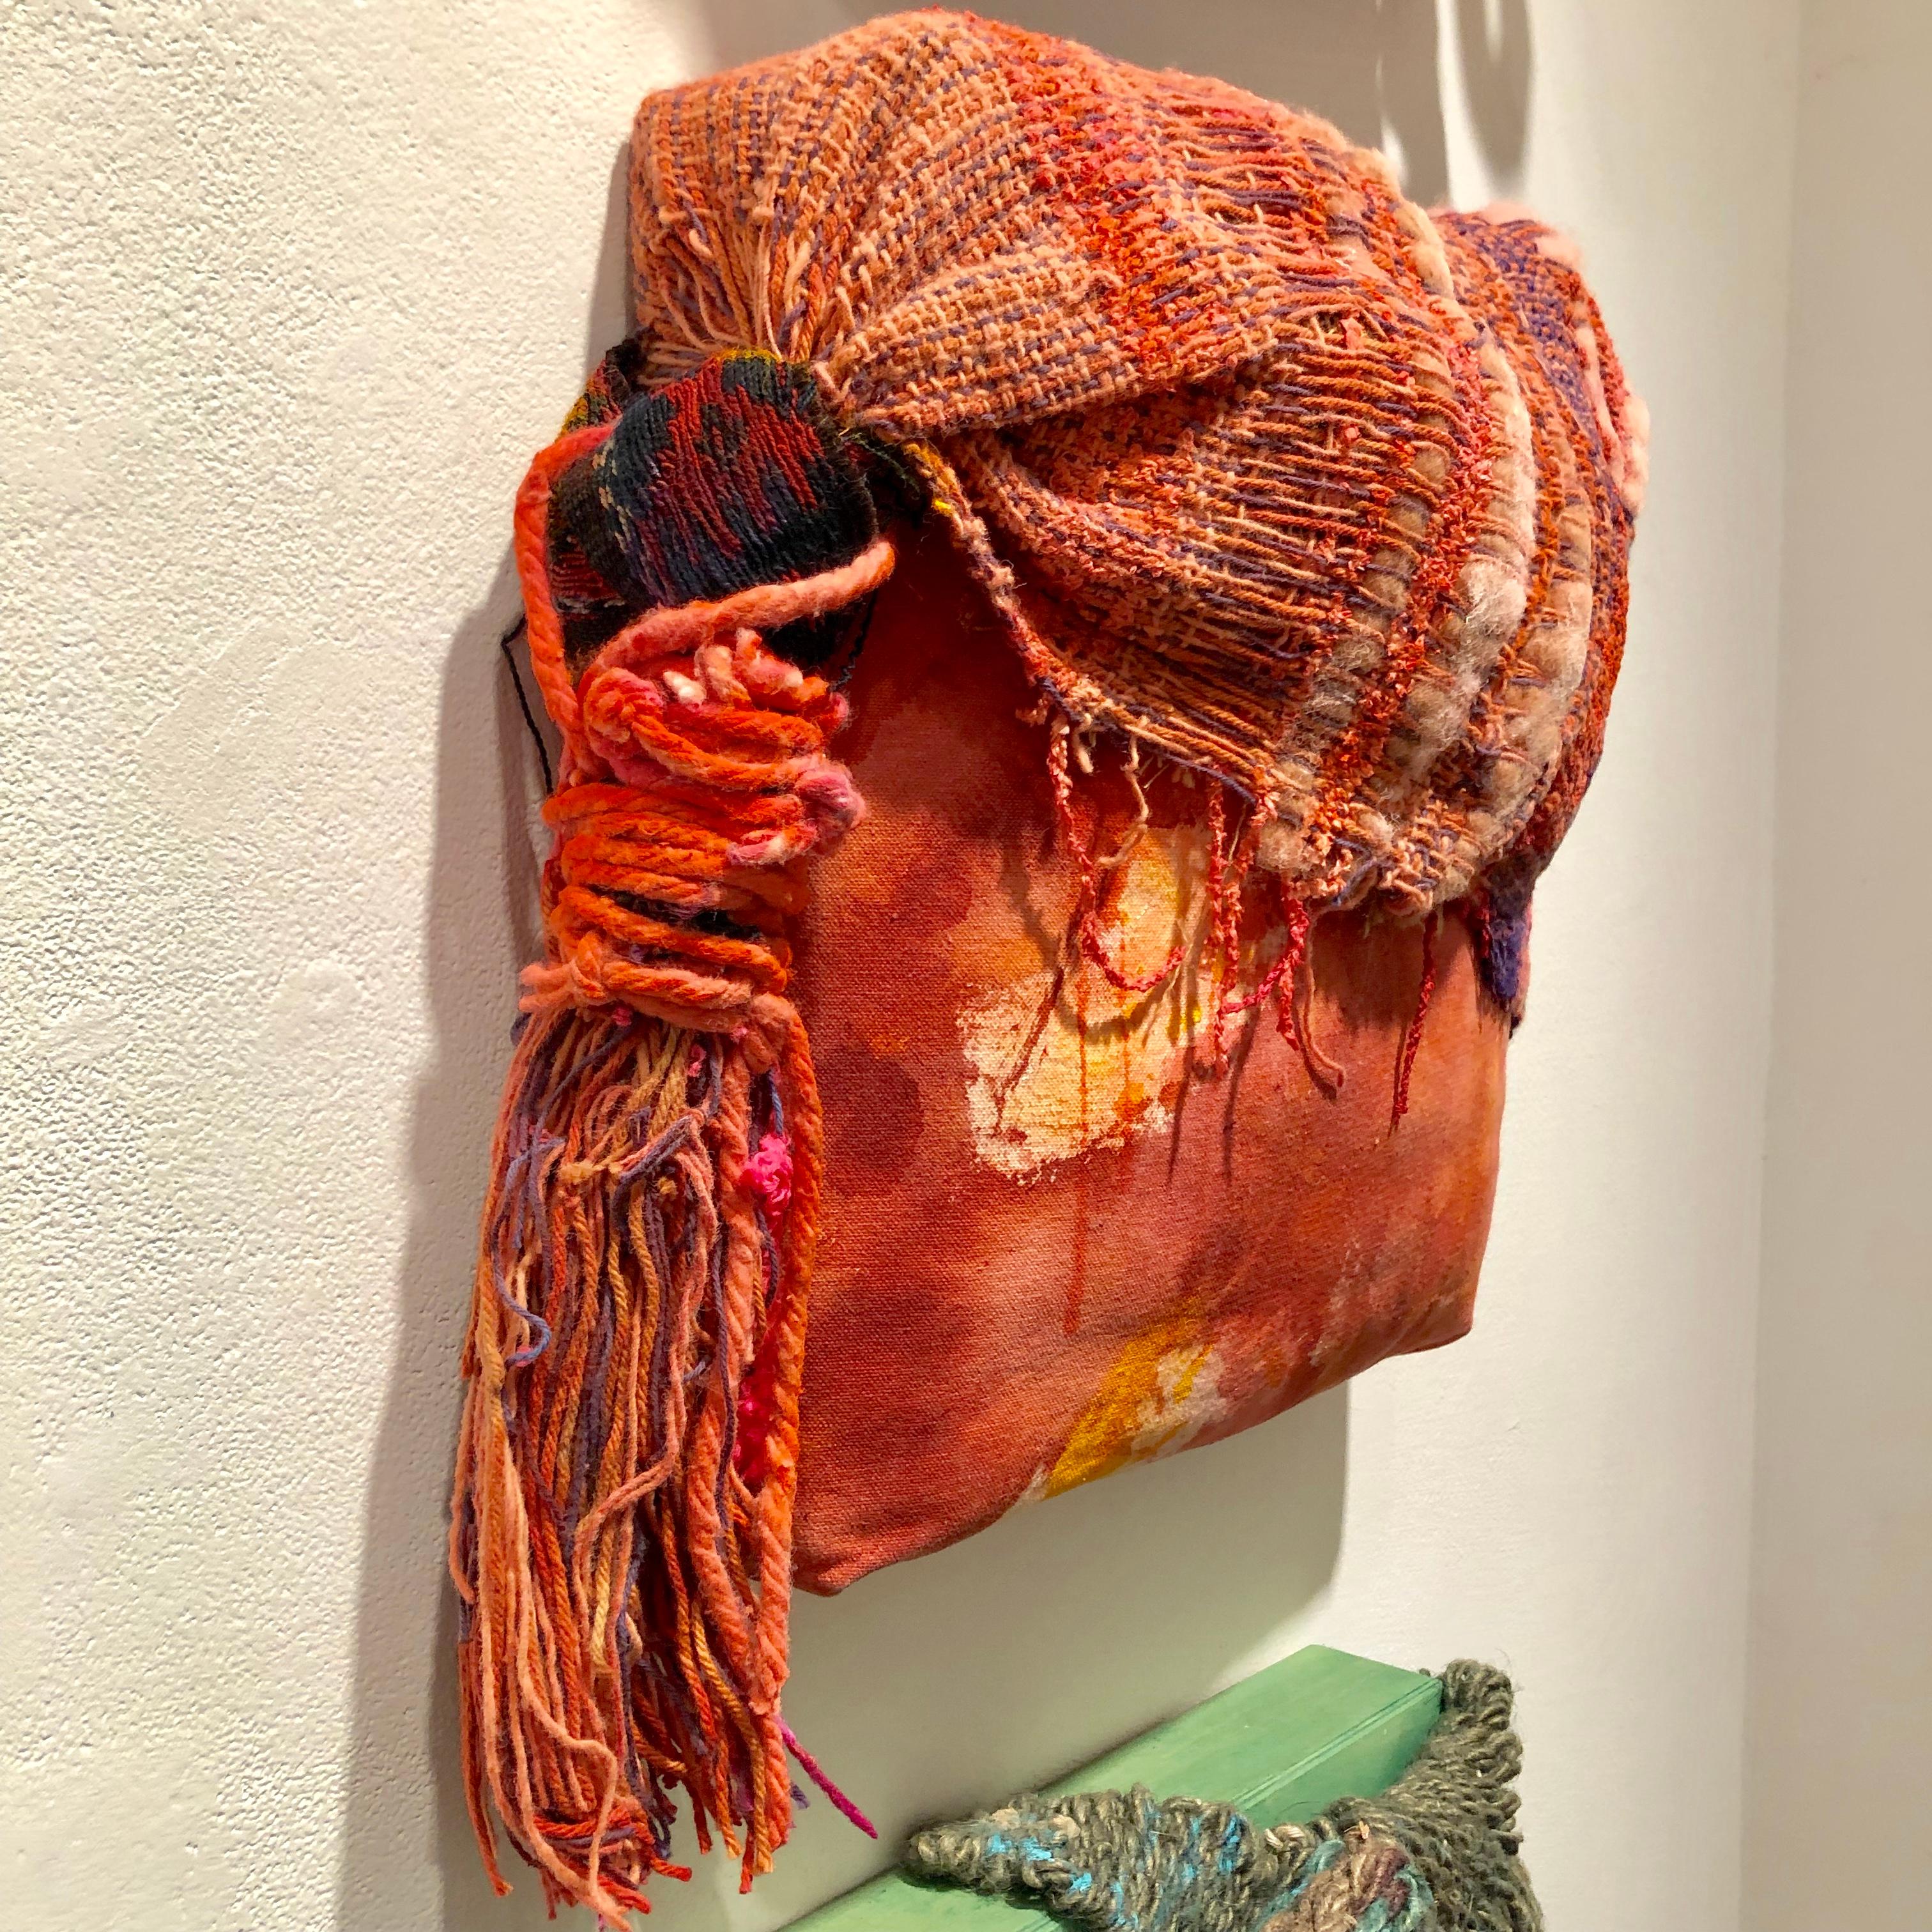 Wall hung fabric sculpture in vibrant, brown and earth colors and various interesting textures. Pieces are sold individually and can be combined to create a larger composition. 

Diane Cooper’s subtle use of materials was inspired by Japanese